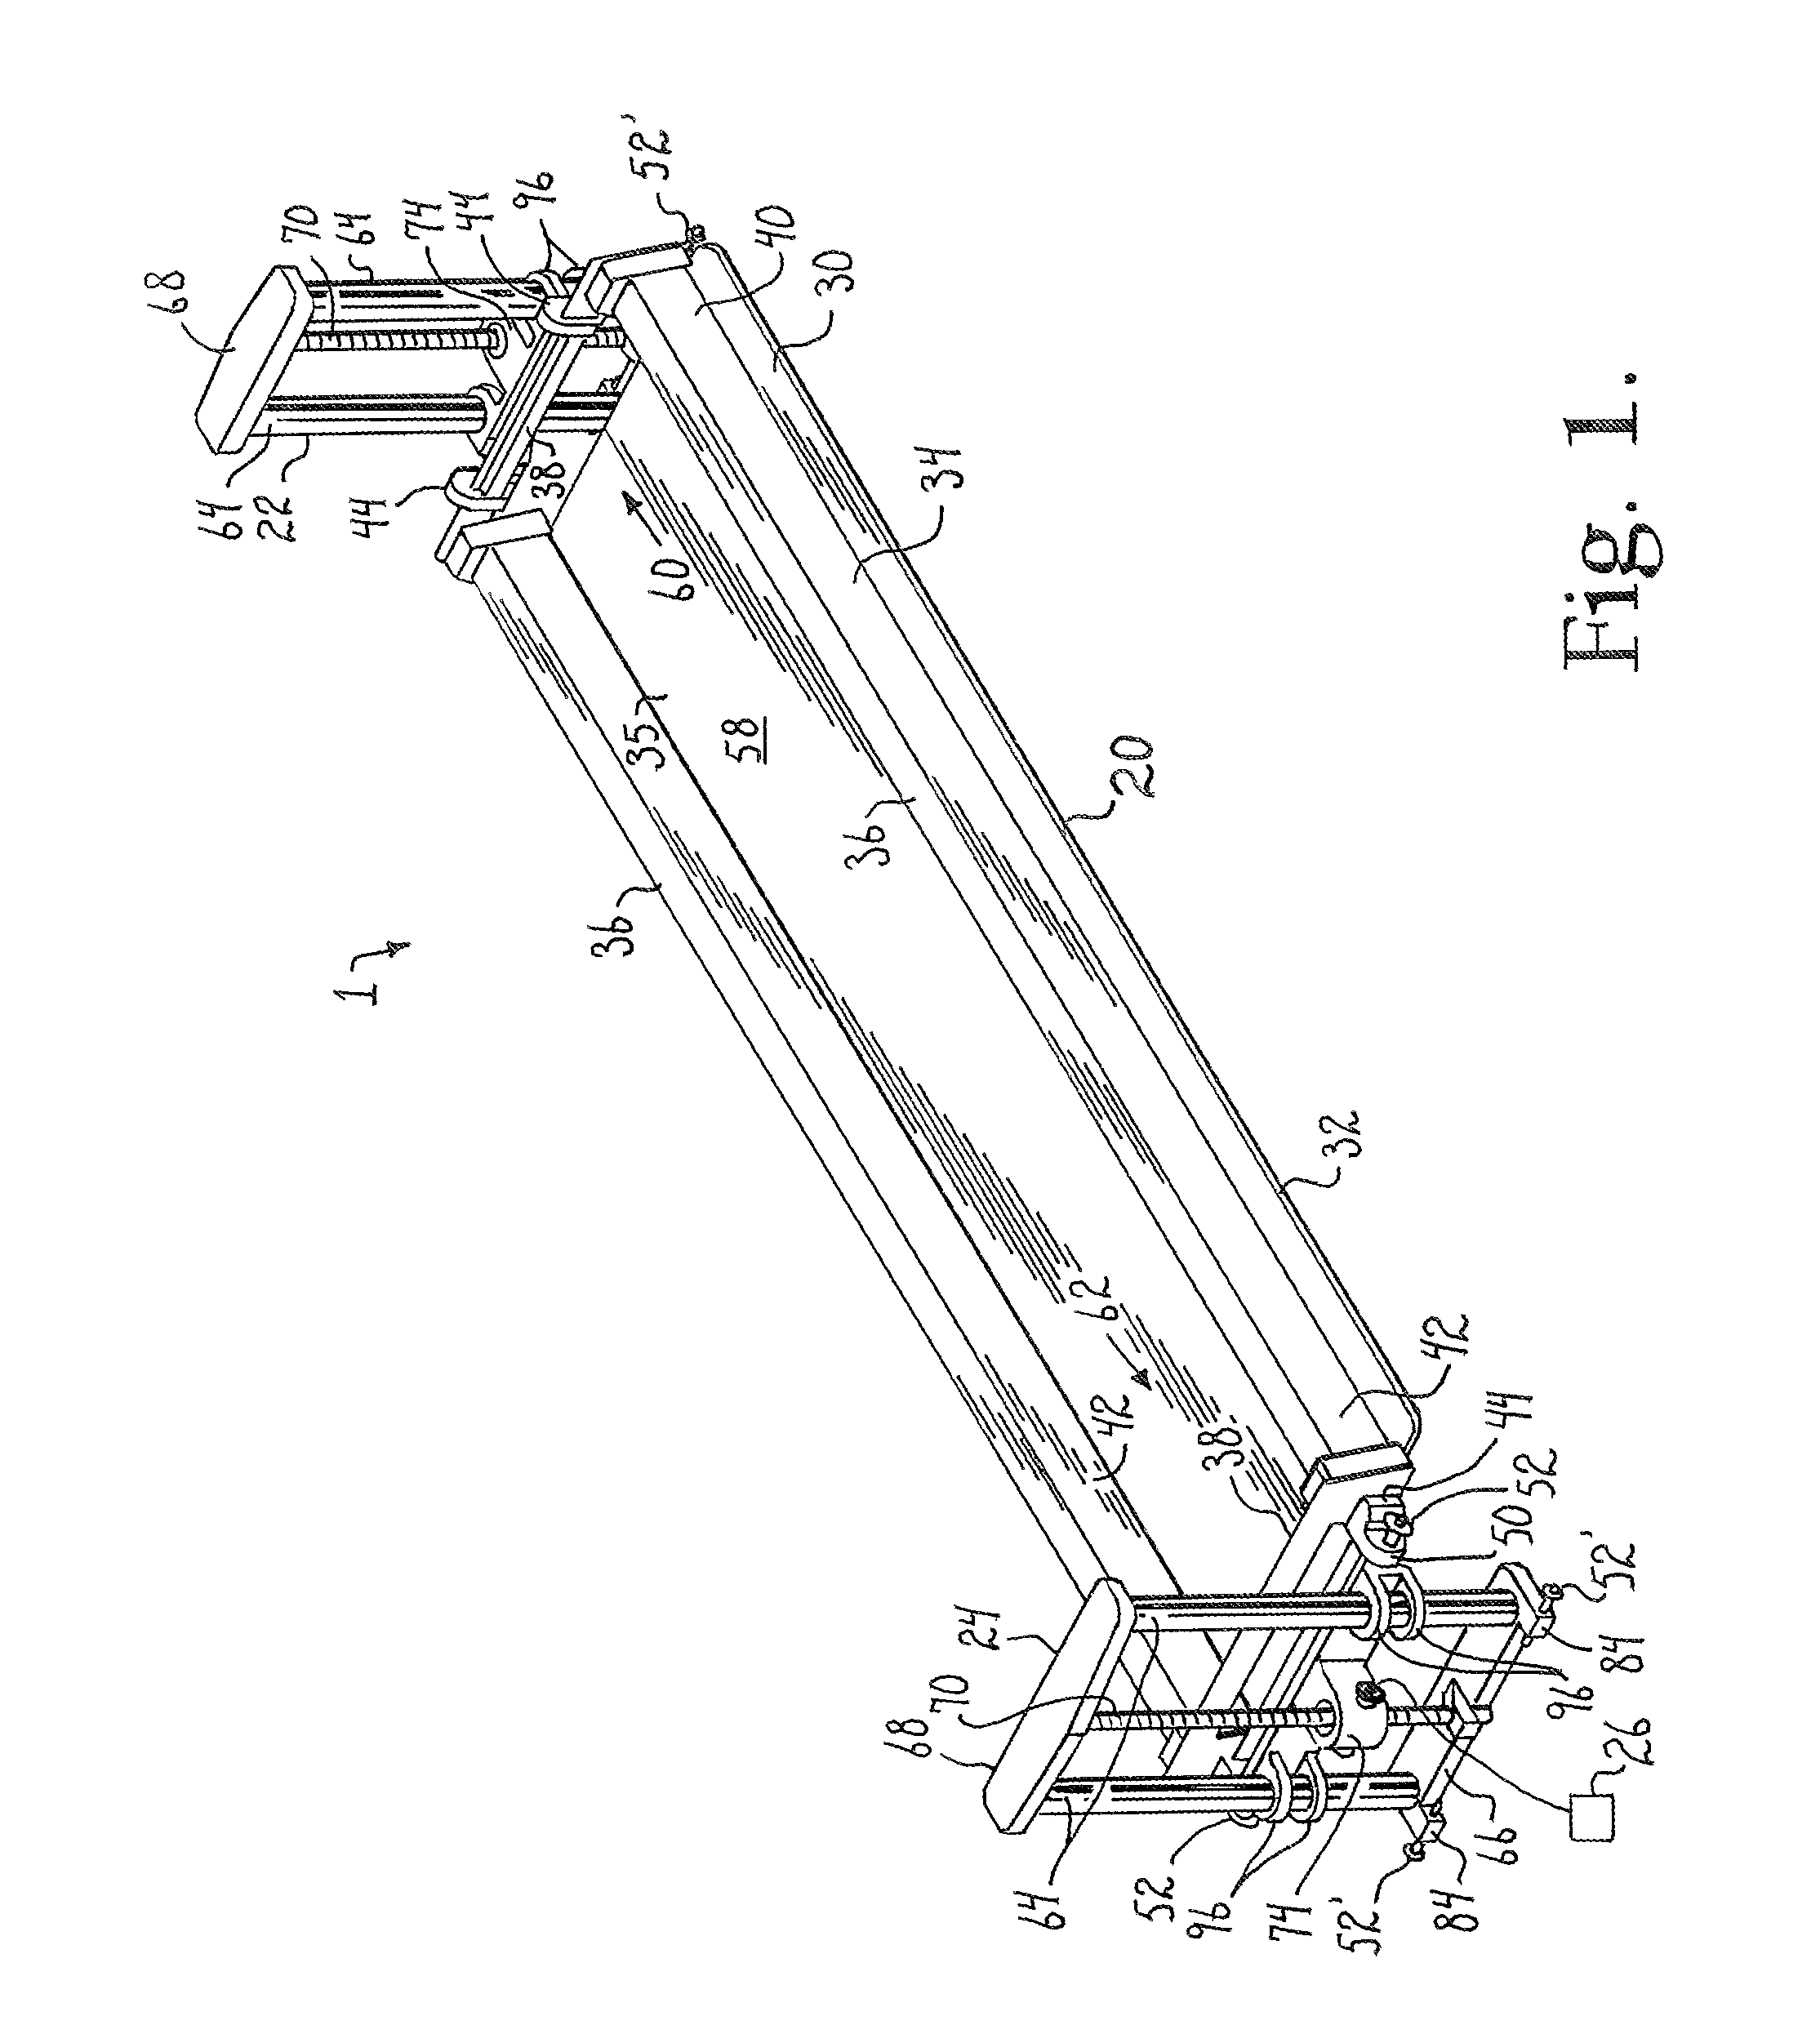 Syncronized patient elevation and positioning apparatus for use with patient positioning support systems